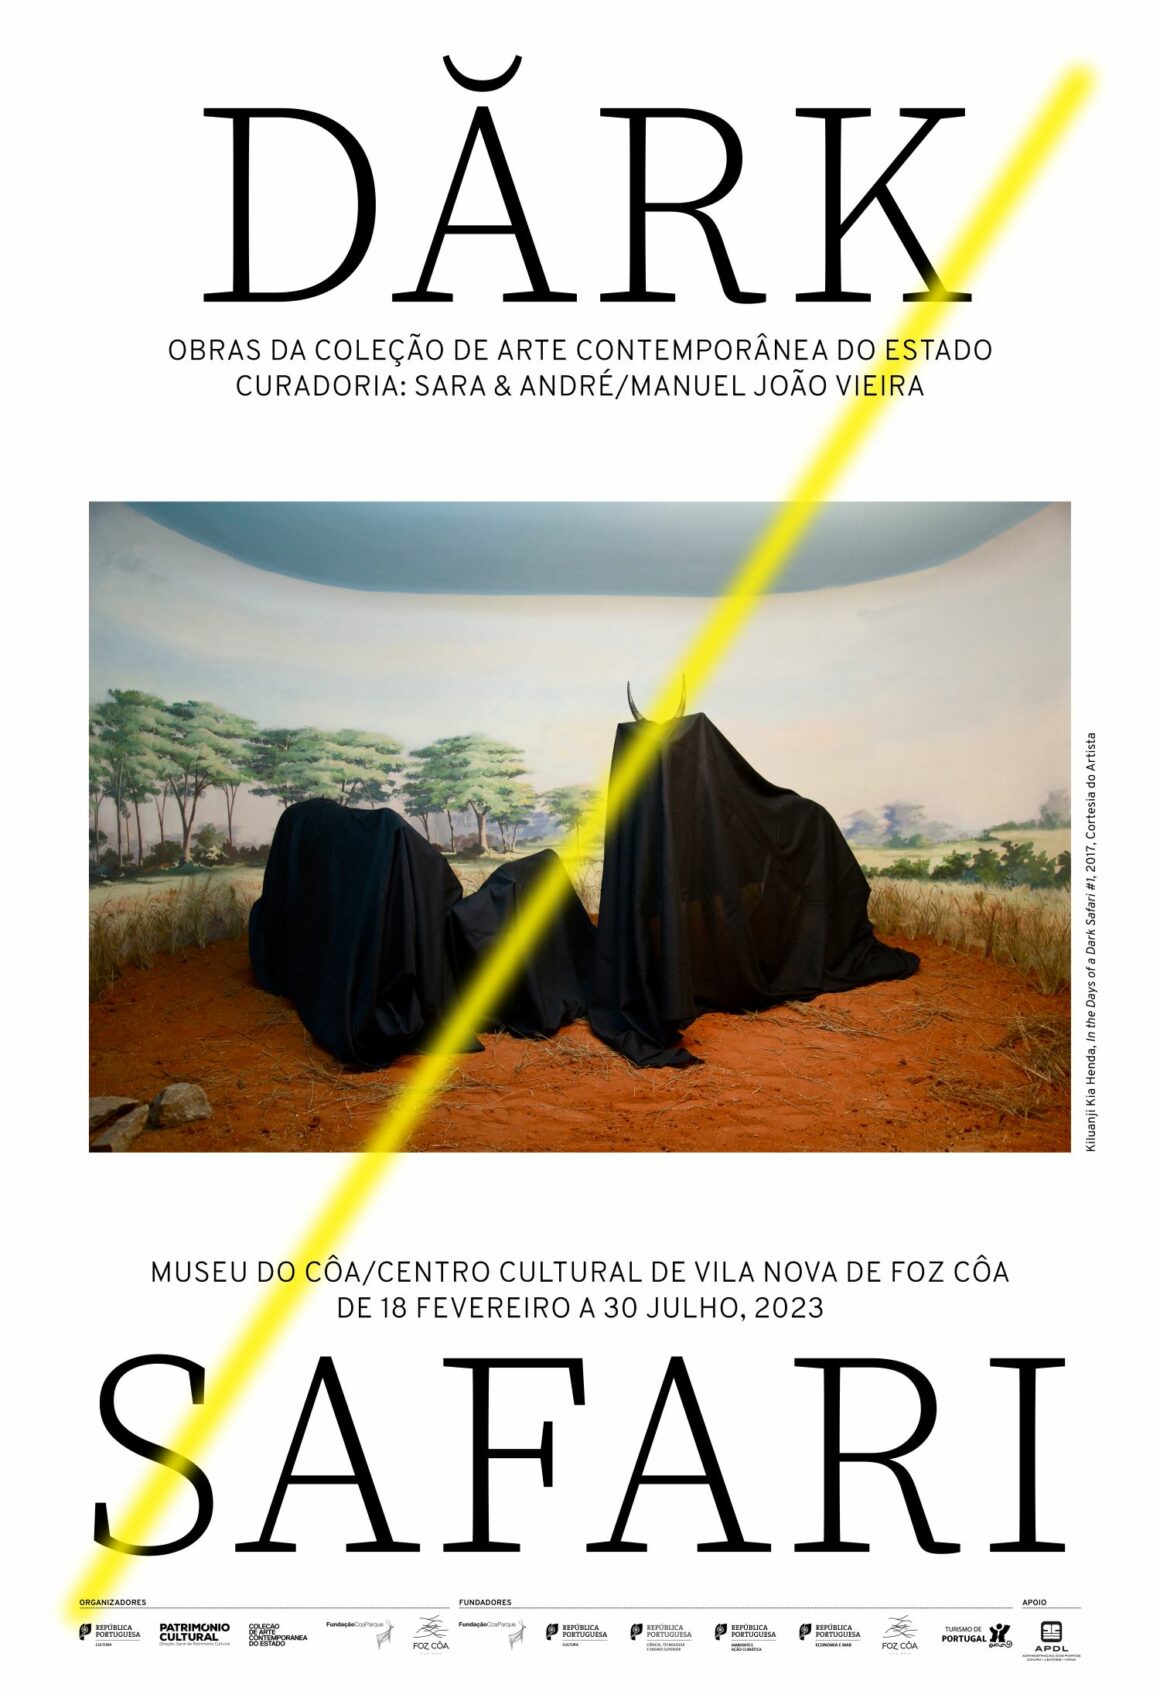 Dark Safari – Contemporary Art Works from State Collection